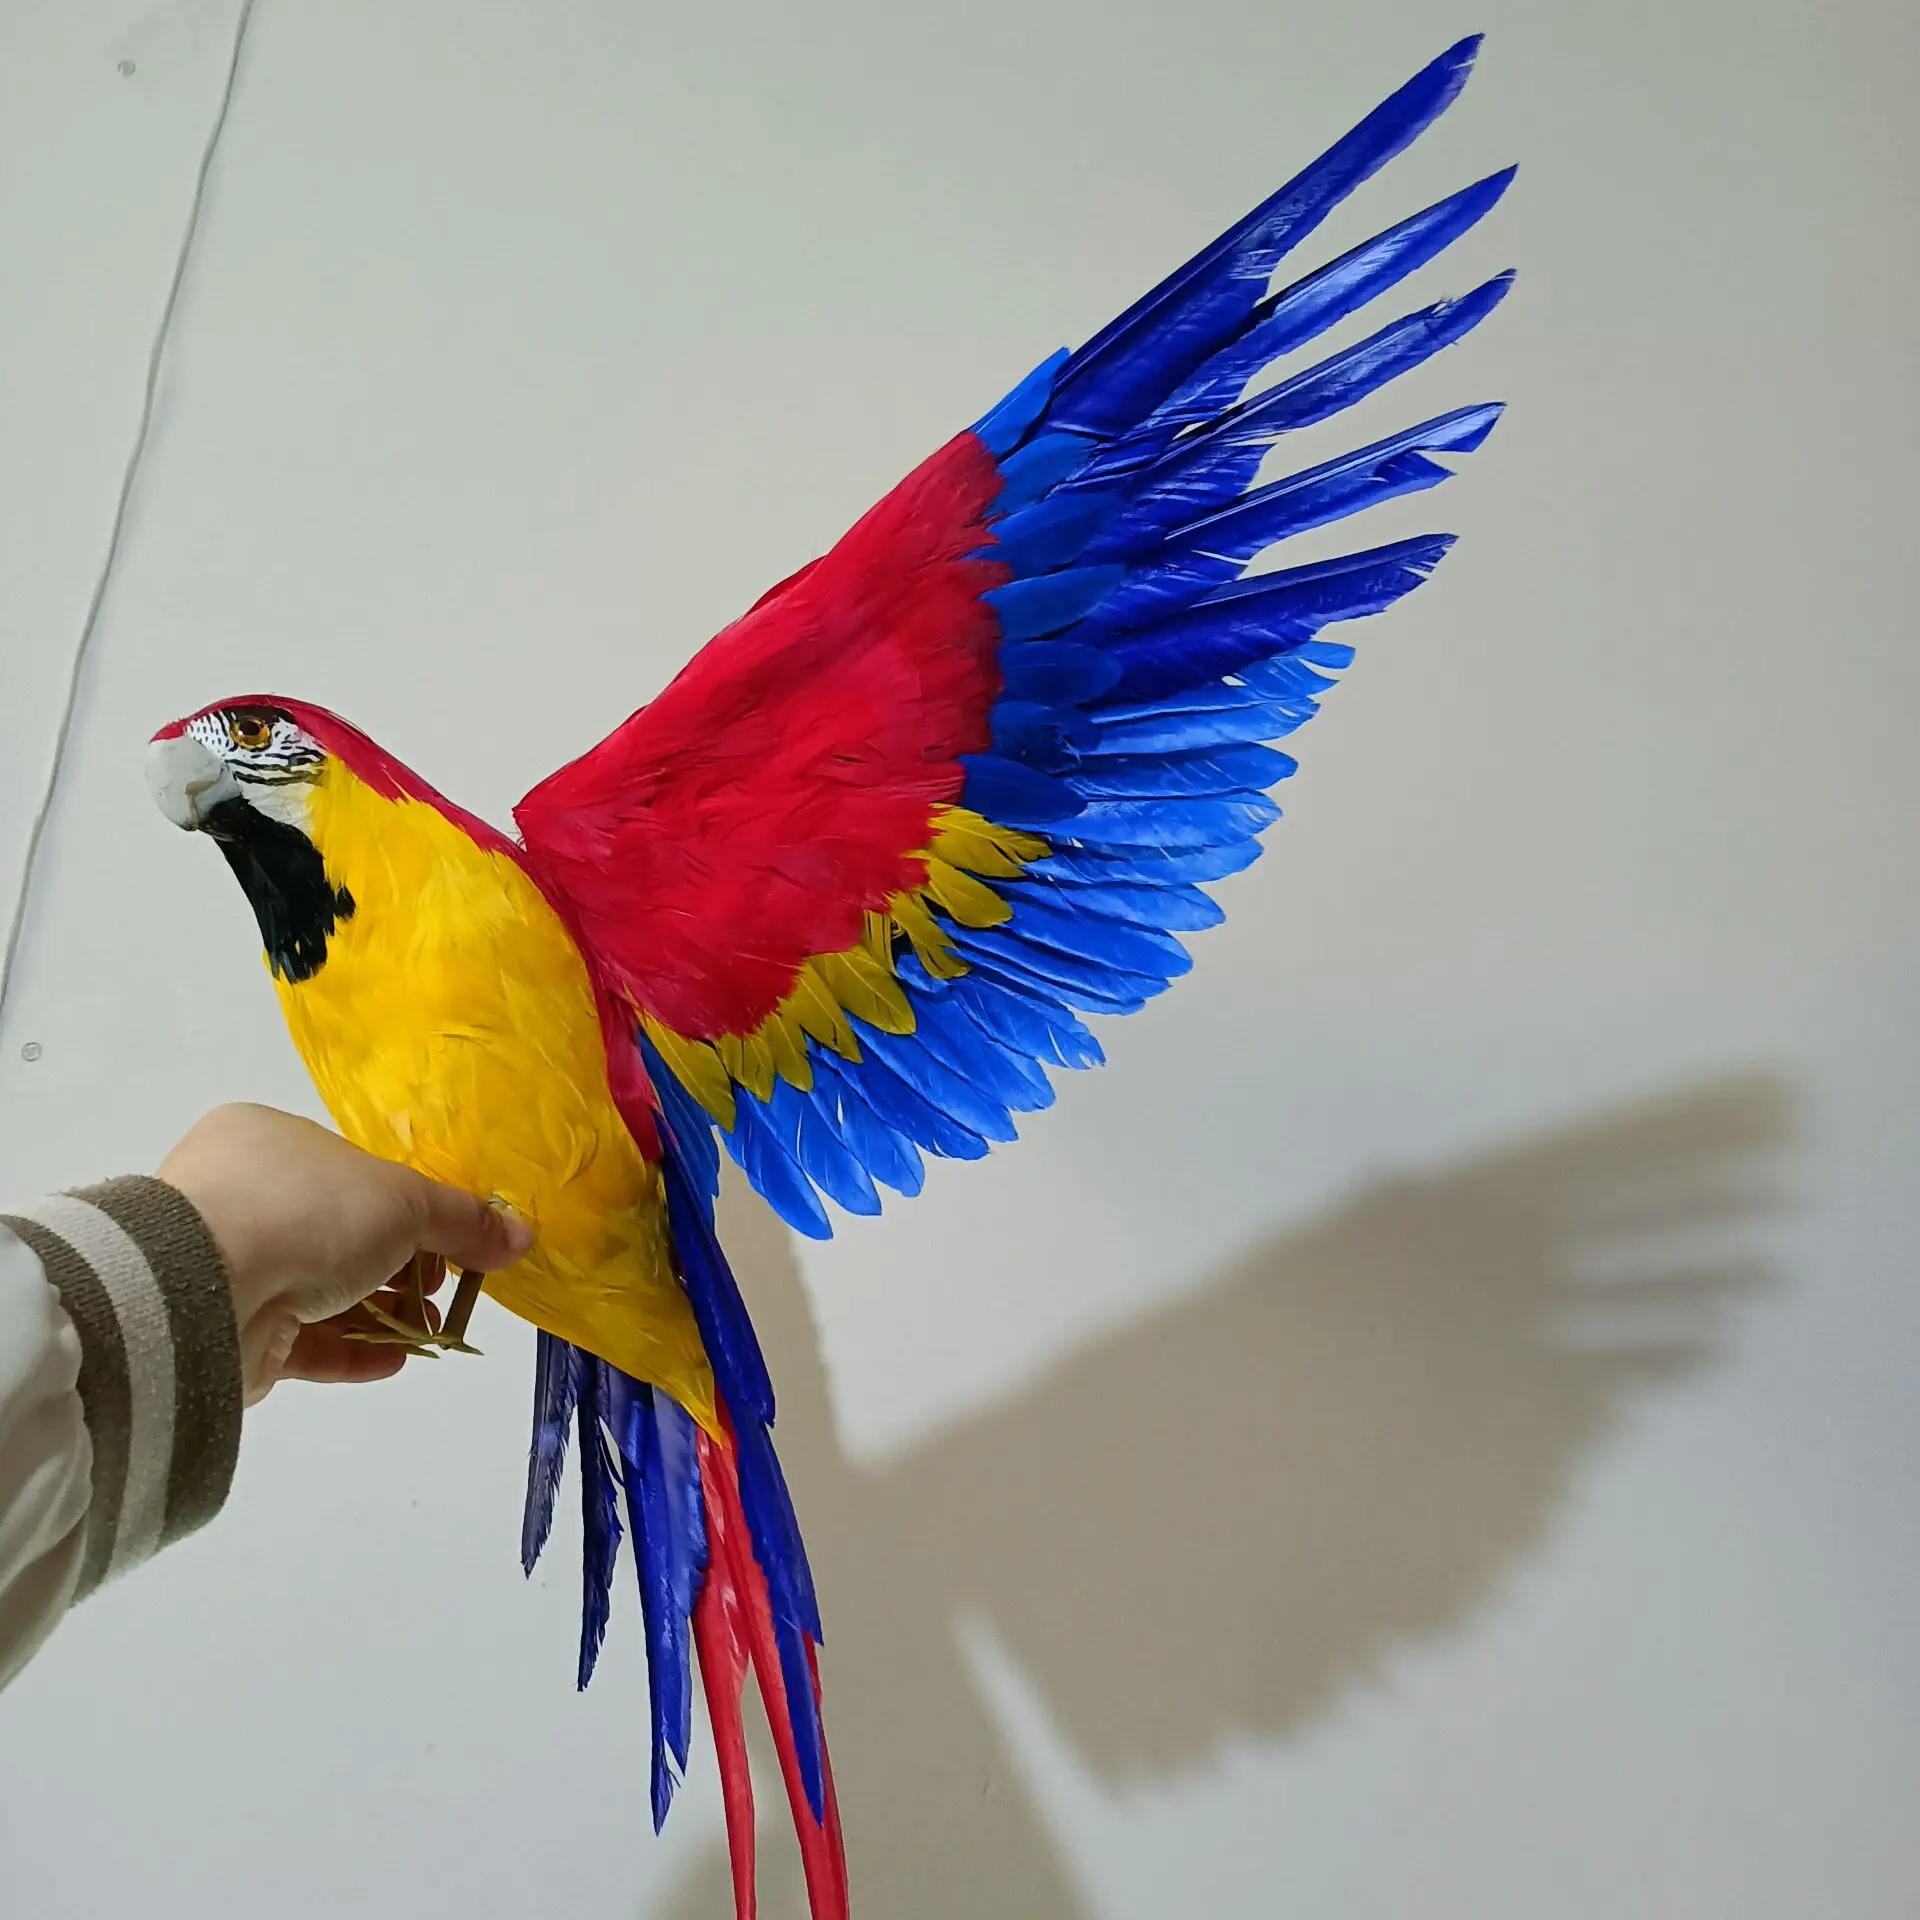 

big red and yellow wings foam&feather parrot model home garden decoration,gift about 42x60cm d2760